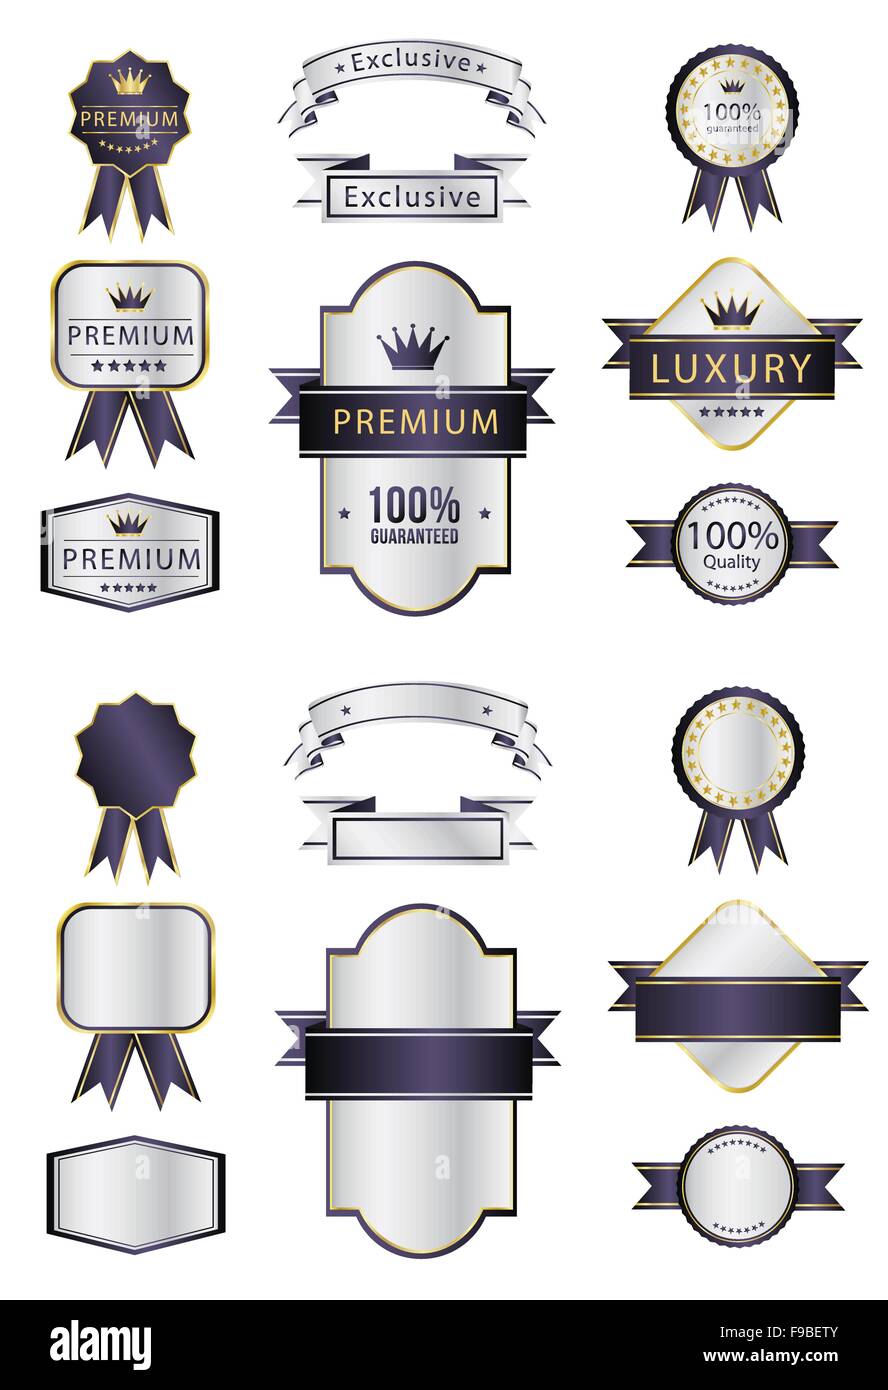 Blank Premium label and budges luxury purple and silver Stock Vector